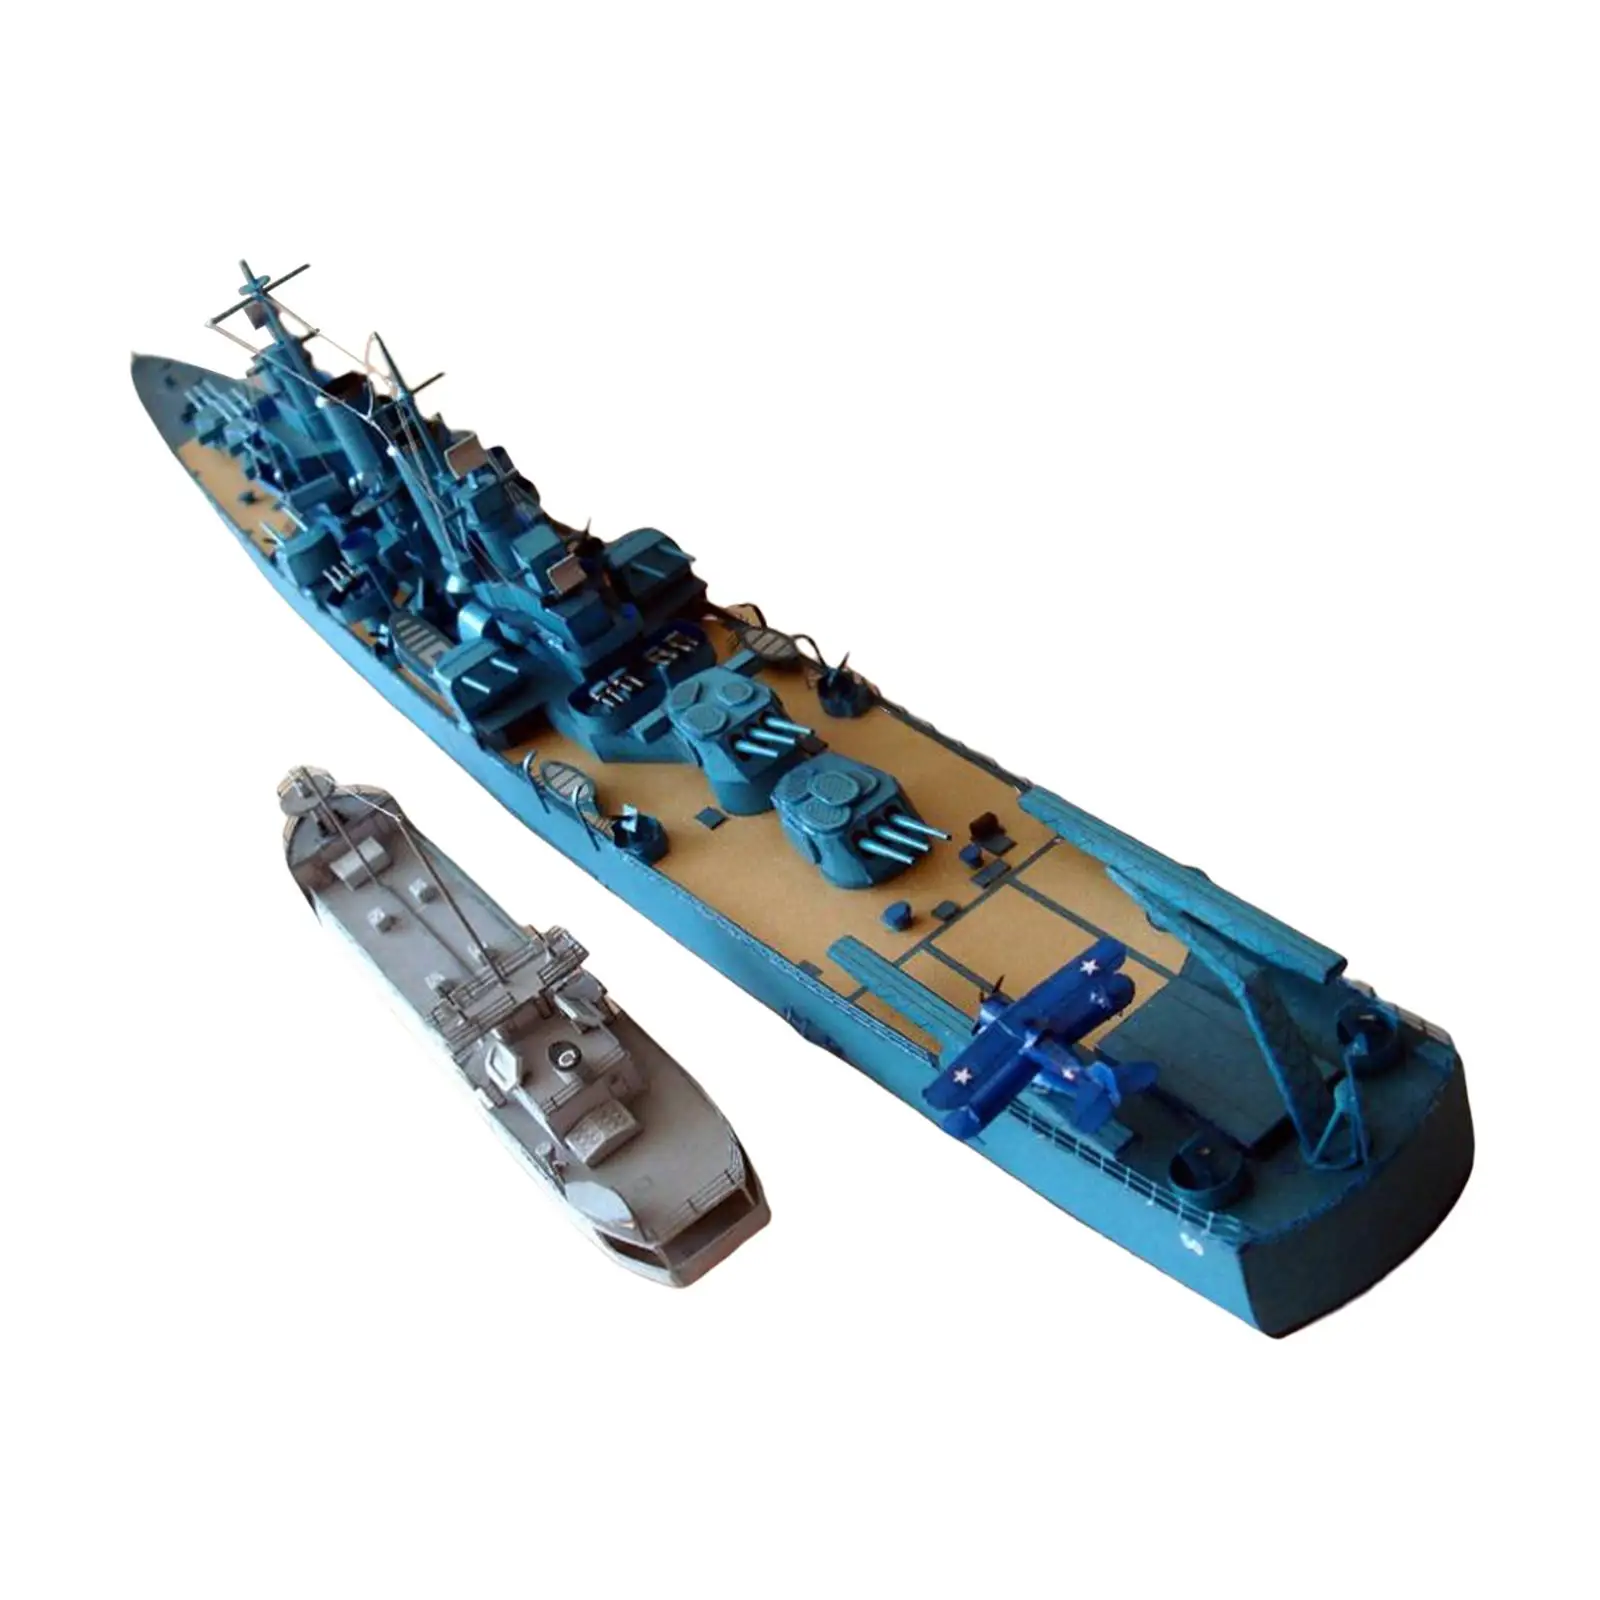 Naval Ship Toy Set, Model, Naval Ship Models, Ship Assembly for Children And Adults